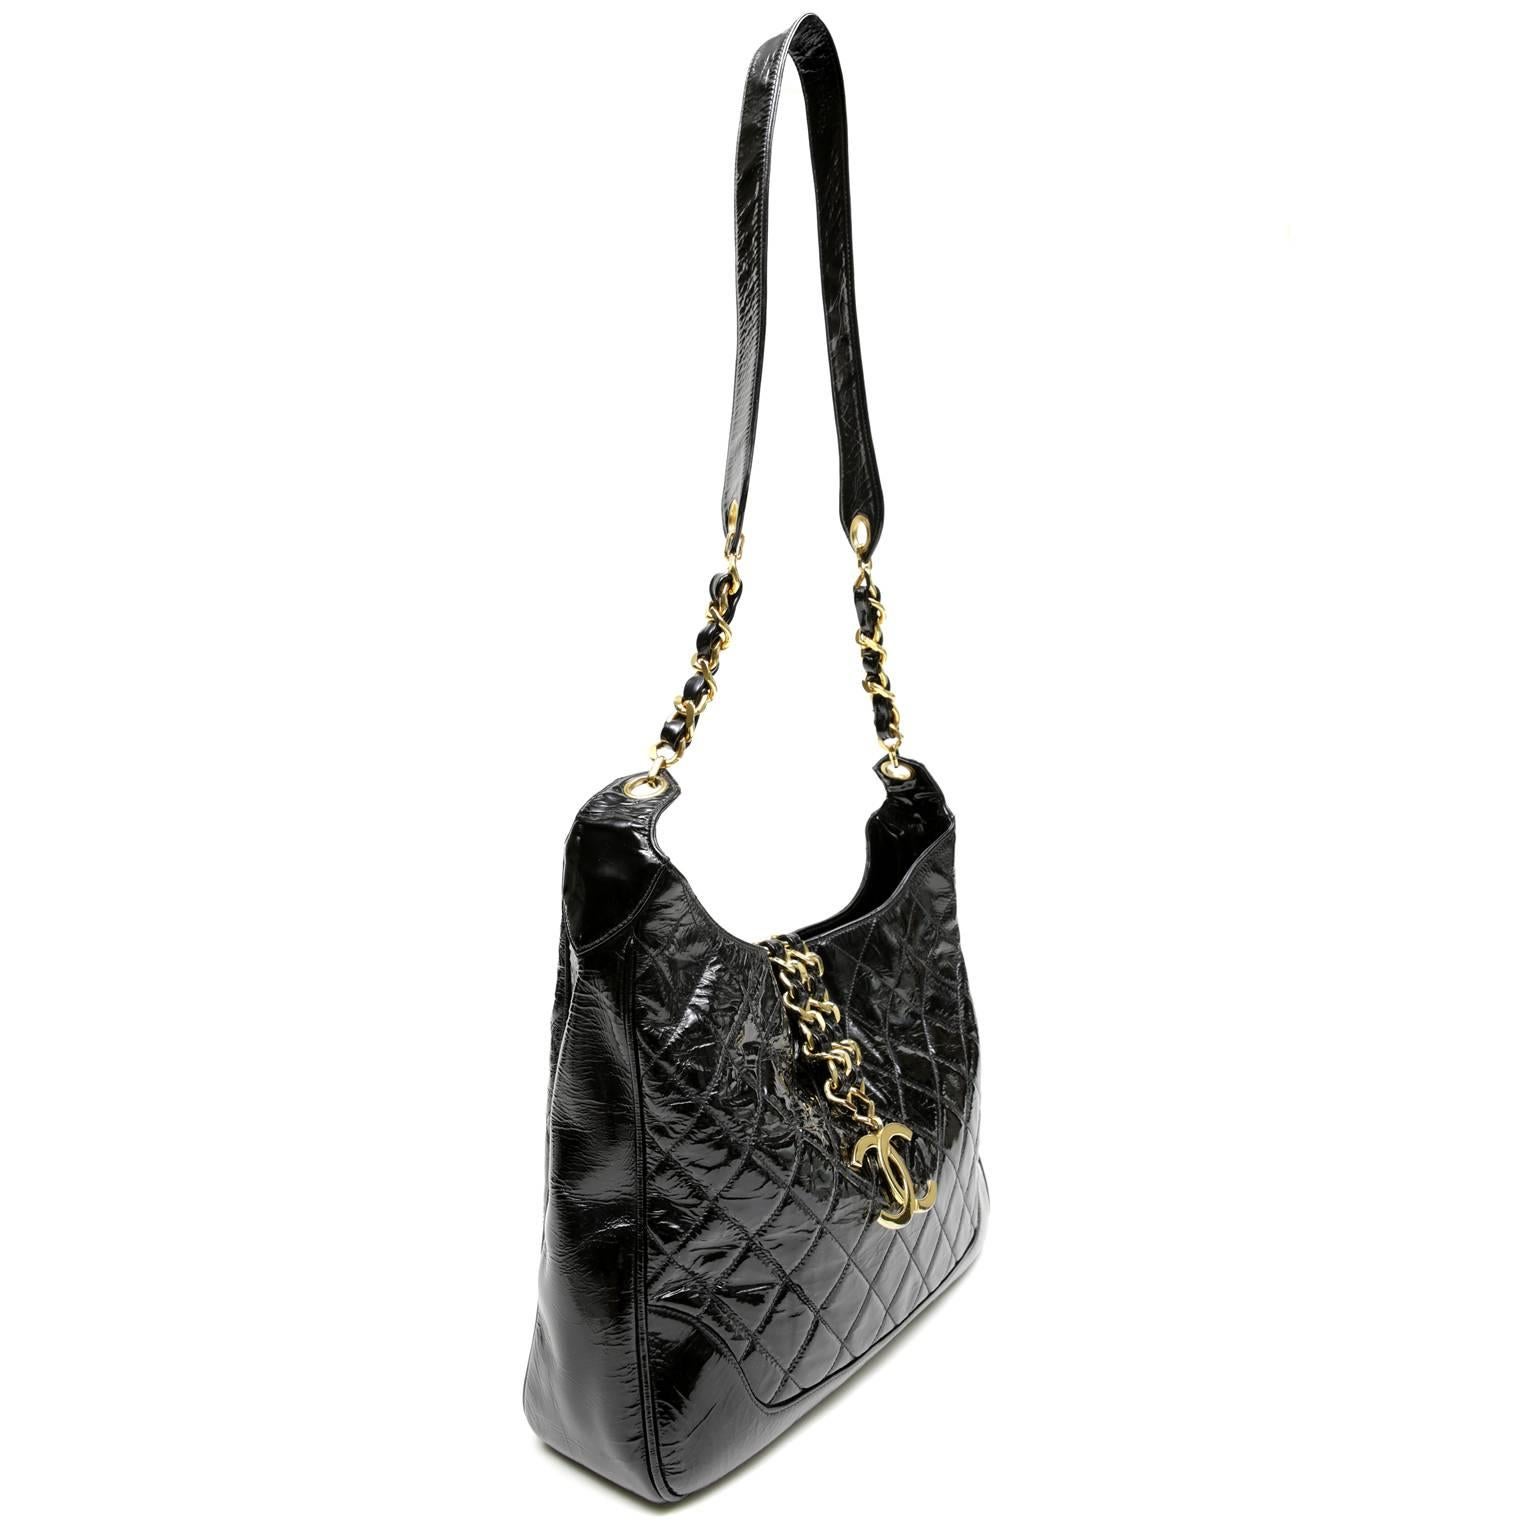 Chanel Vintage Black Patent Leather Cross Body Bag- Nearly Pristine Condition
  An 18K gold plated oversized CC makes this extraordinary piece truly collectible.  
Sleek black patent leather is quilted in signature Chanel diamond stitched pattern.